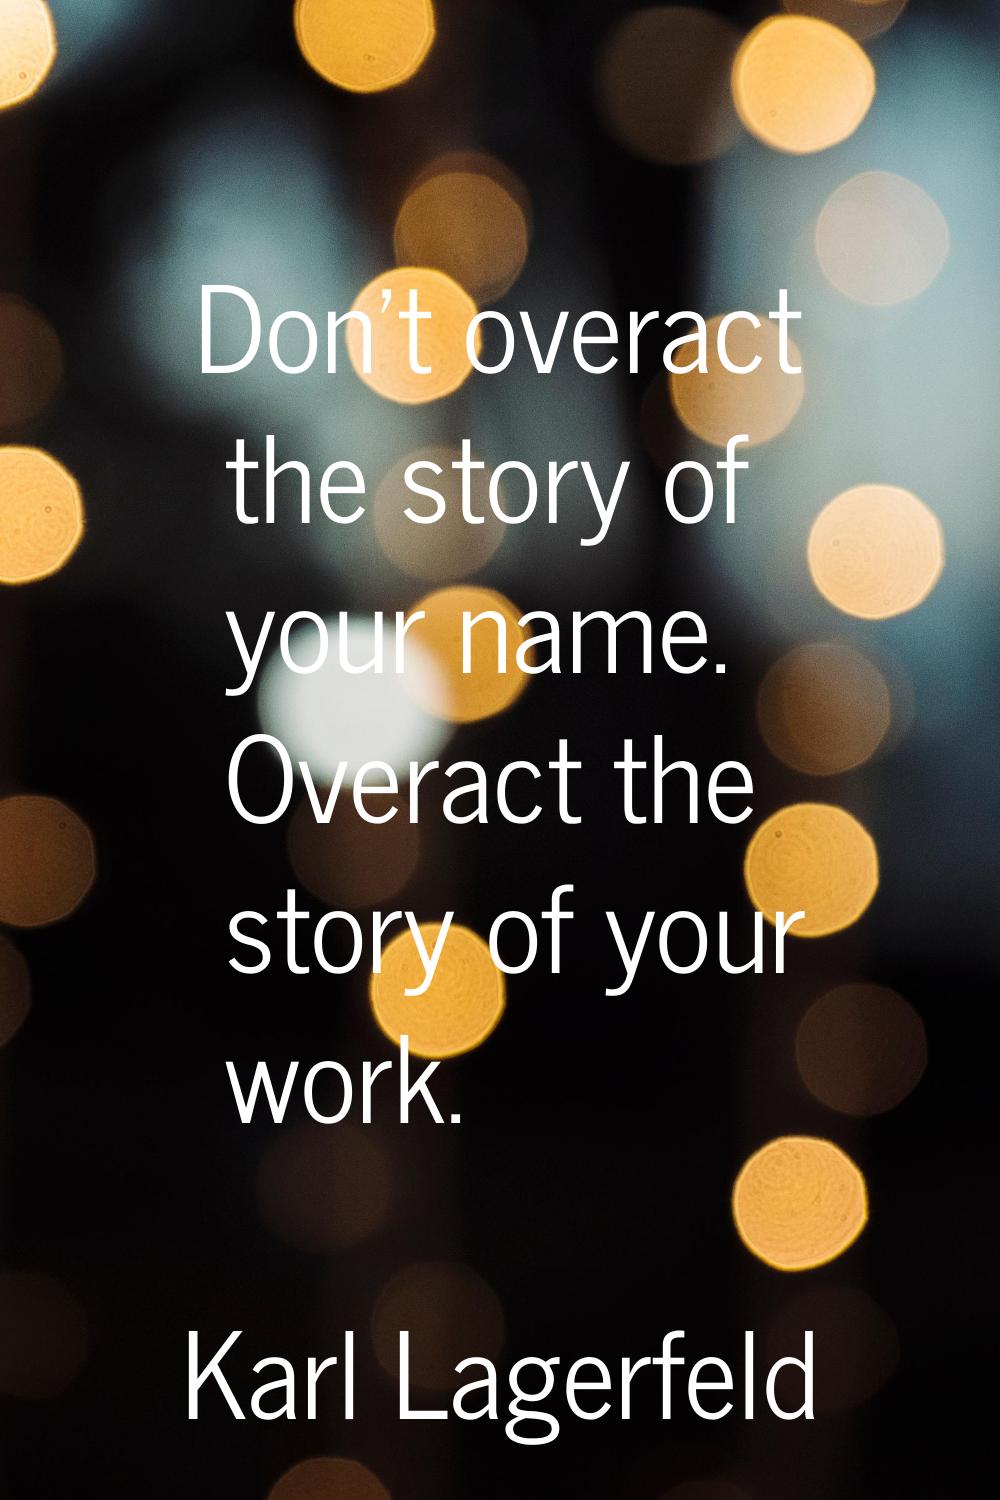 Don't overact the story of your name. Overact the story of your work.